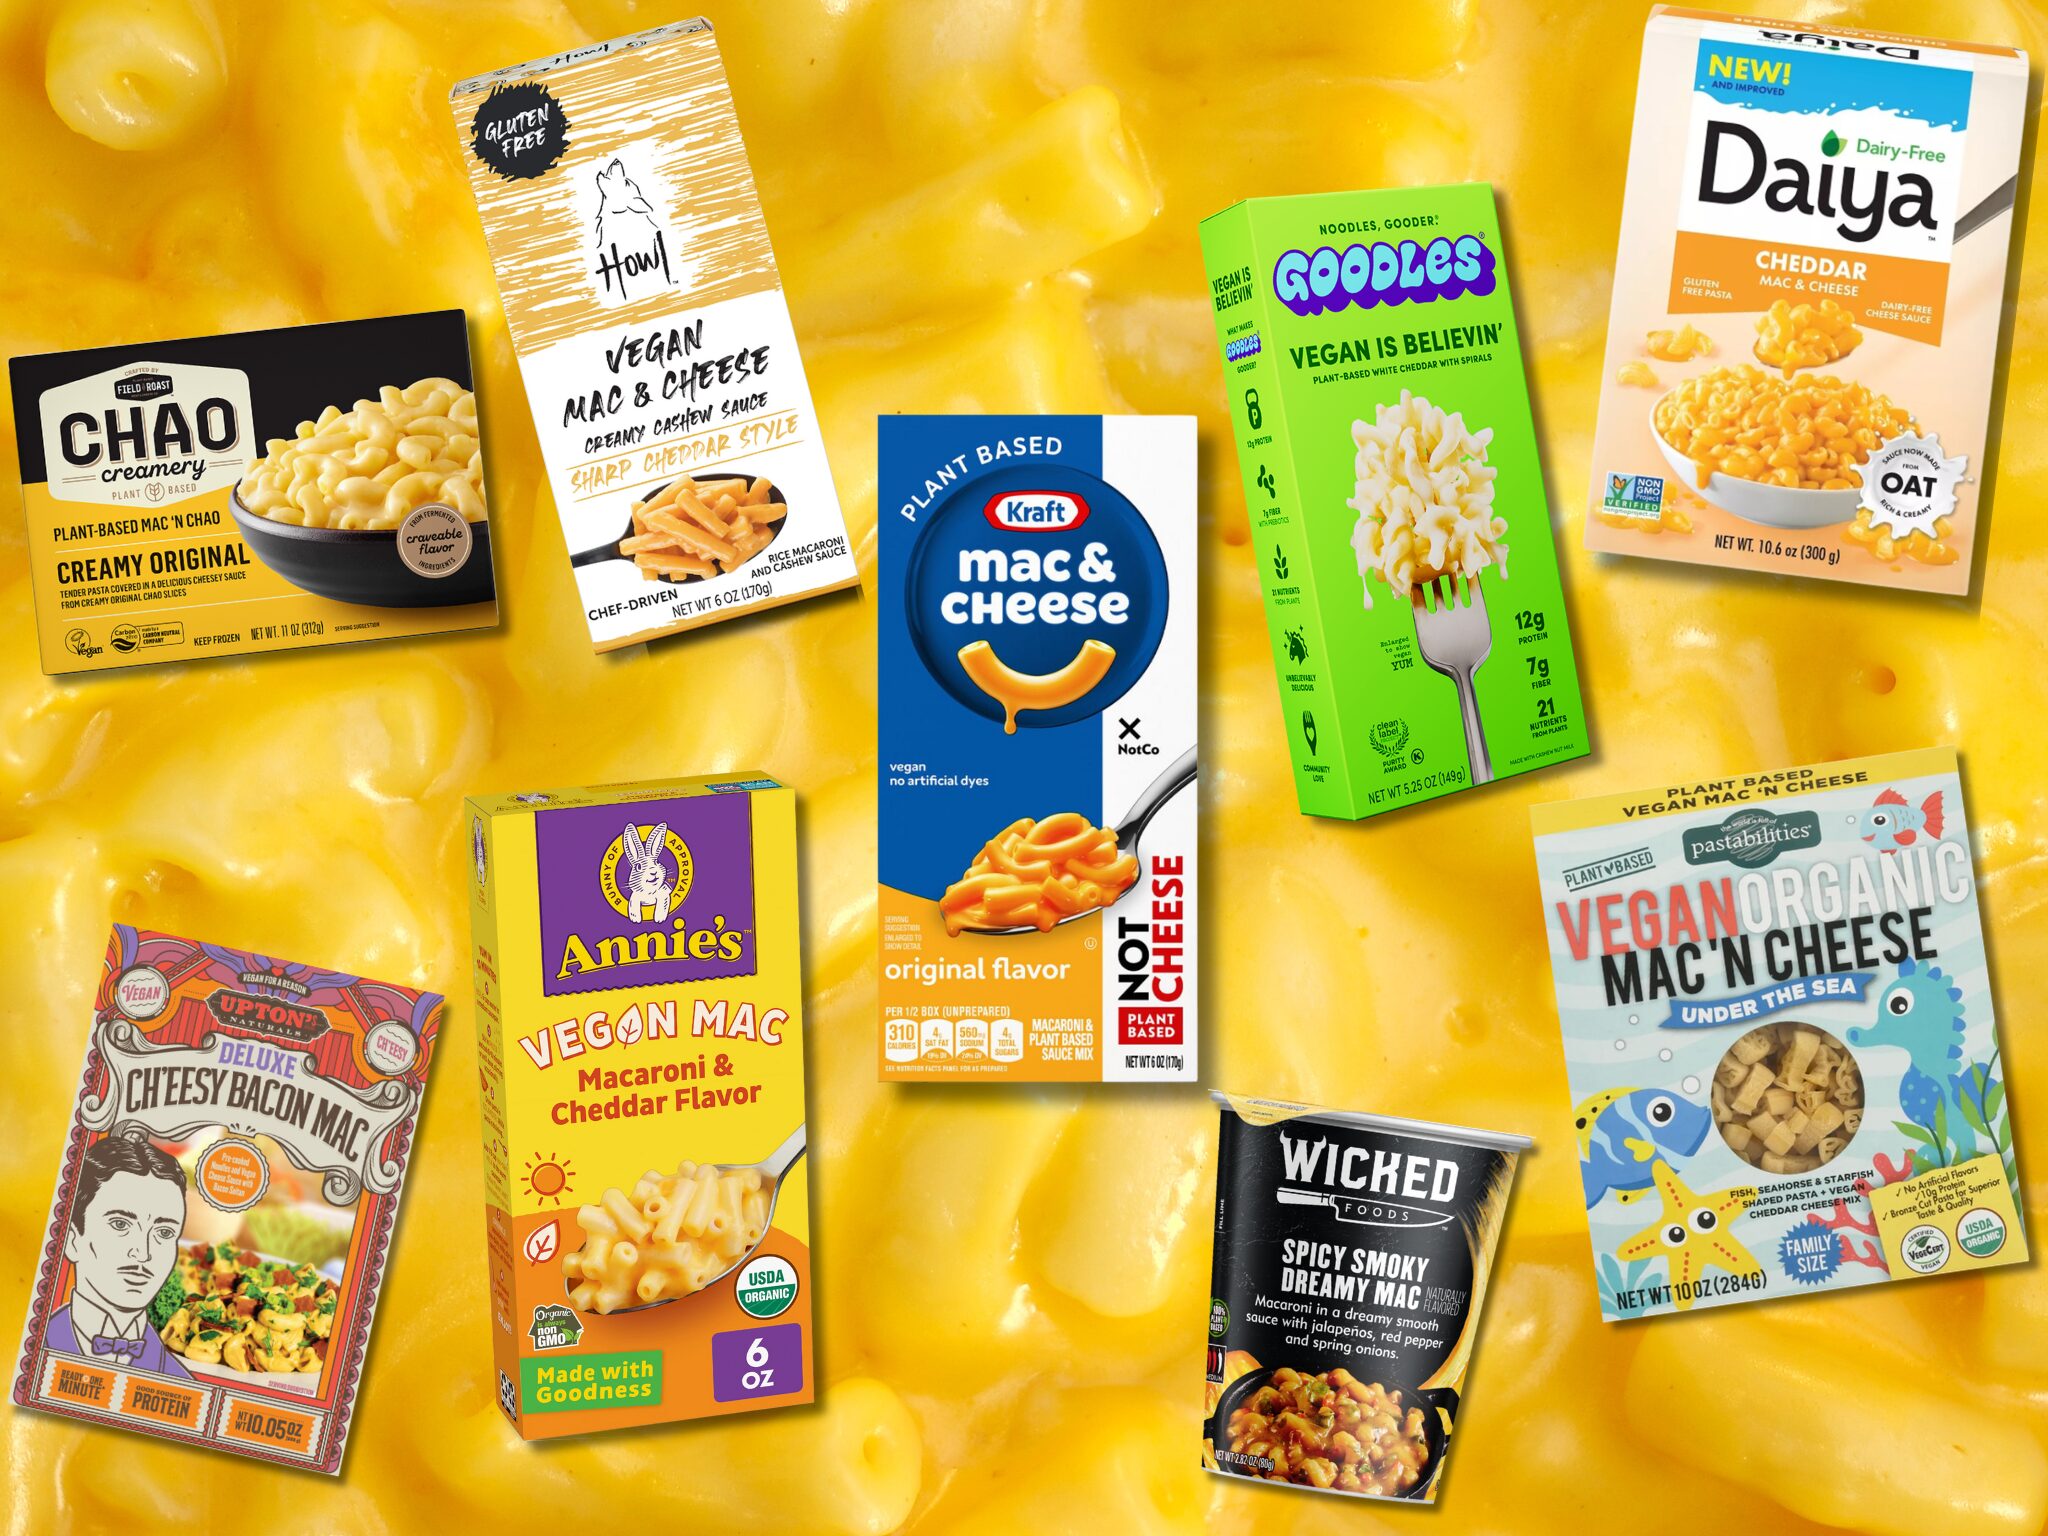 Kraft Just Brought Back a Cult-Favorite Mac & Cheese